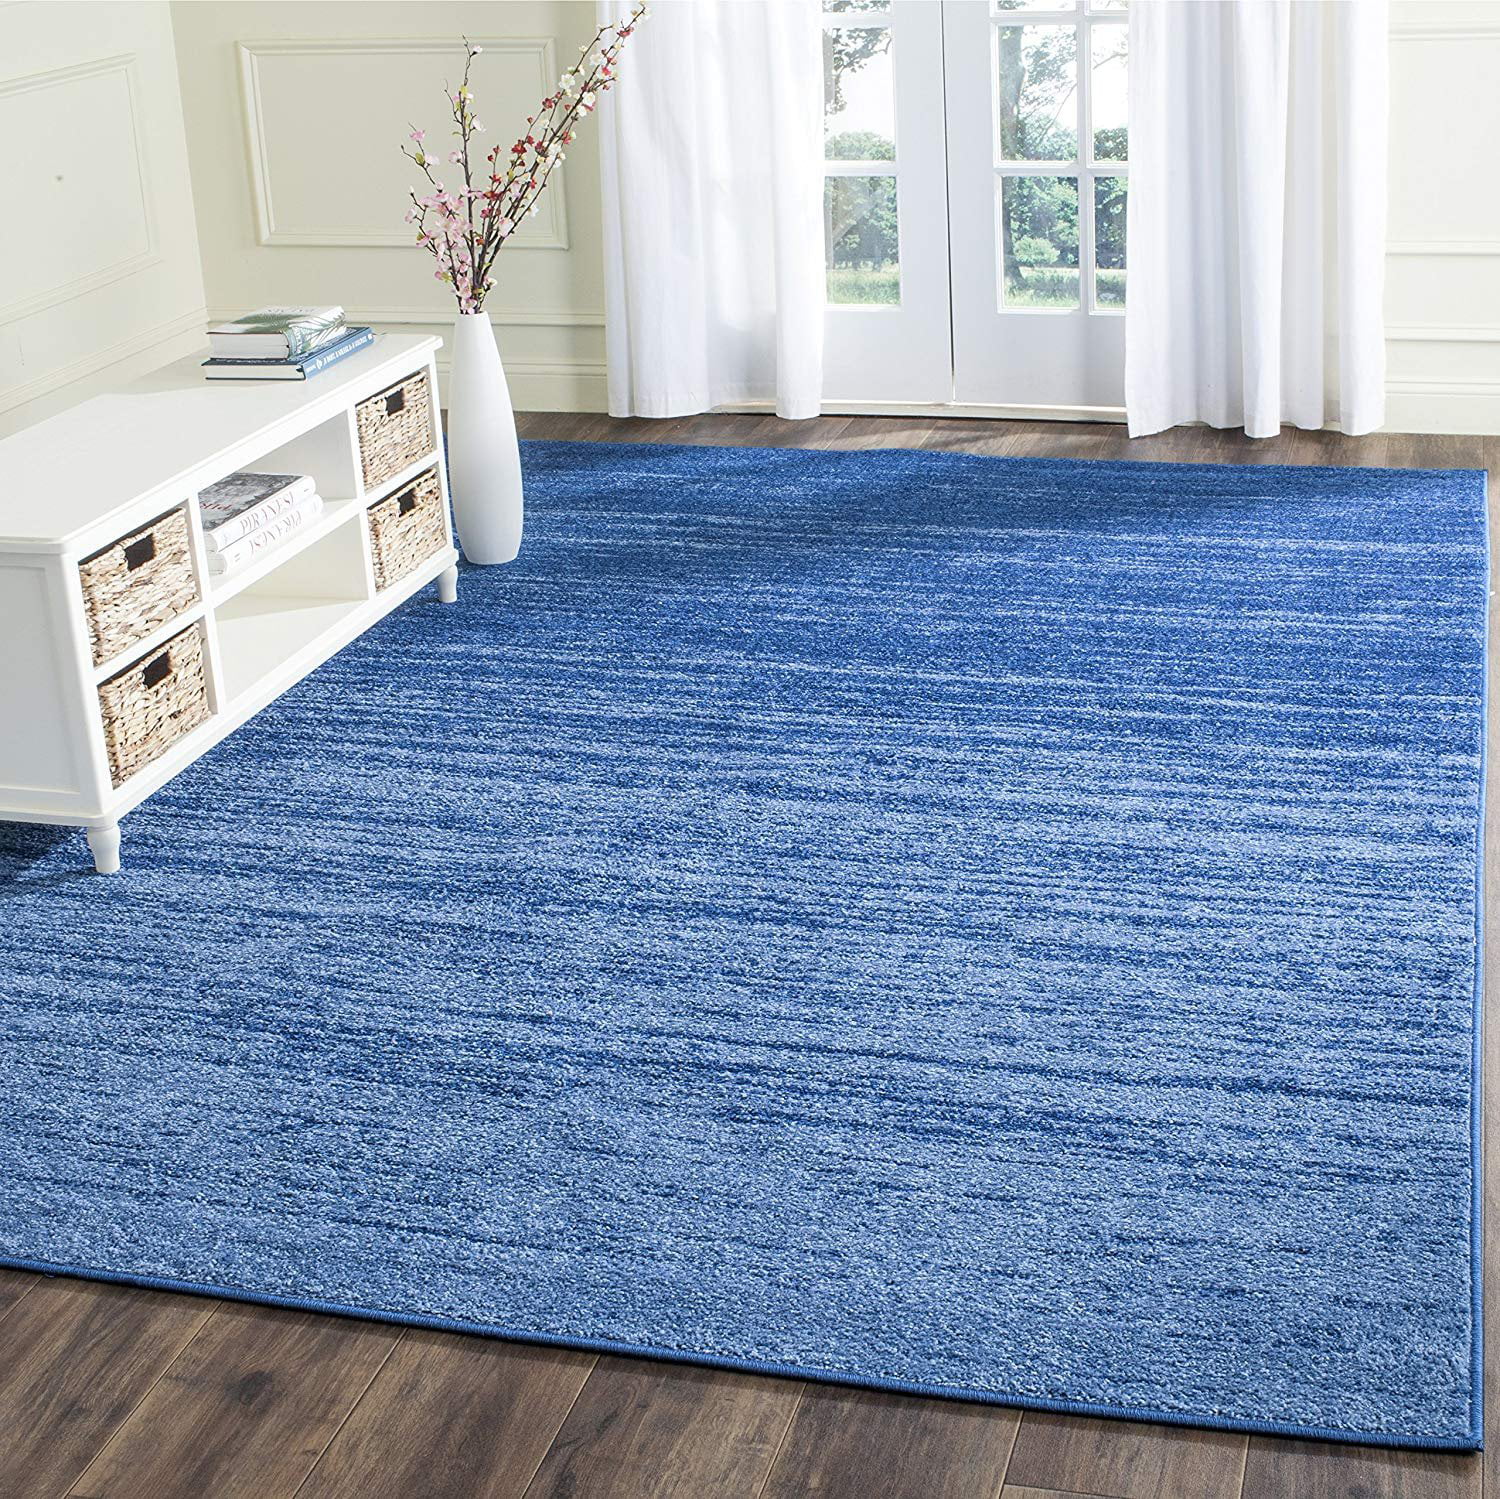 Blue abstract rug